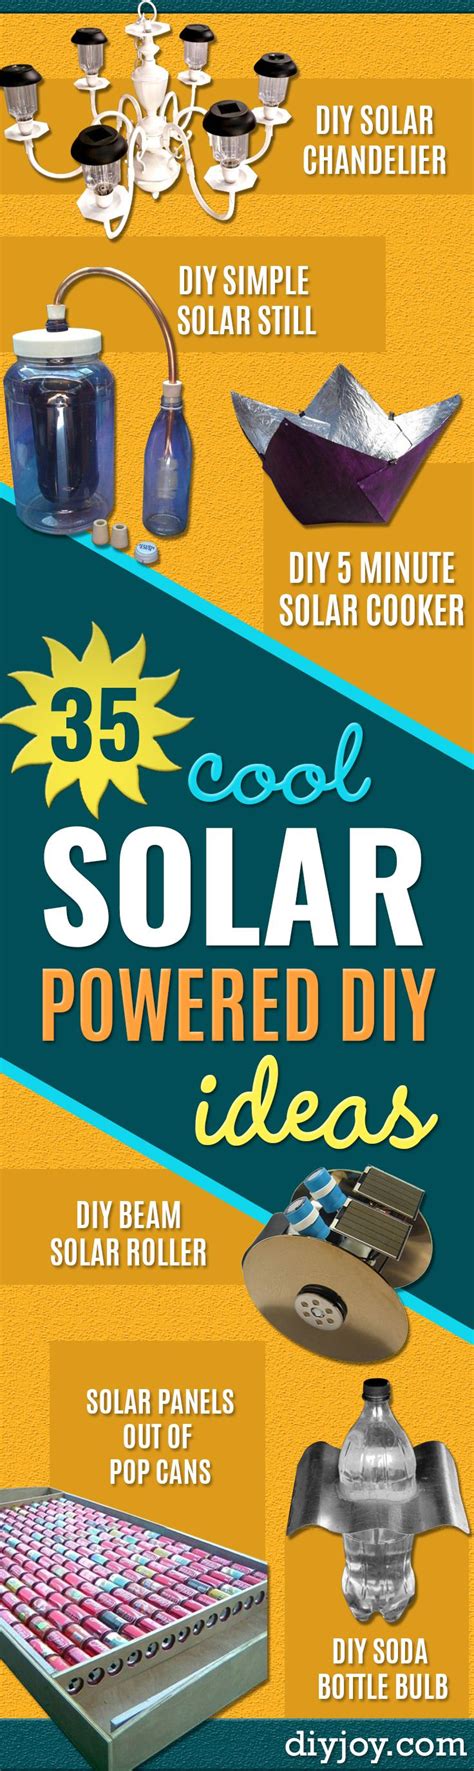 Diy Solar Powered Projects Easy Solar Crafts And Dyi Ideas For Making